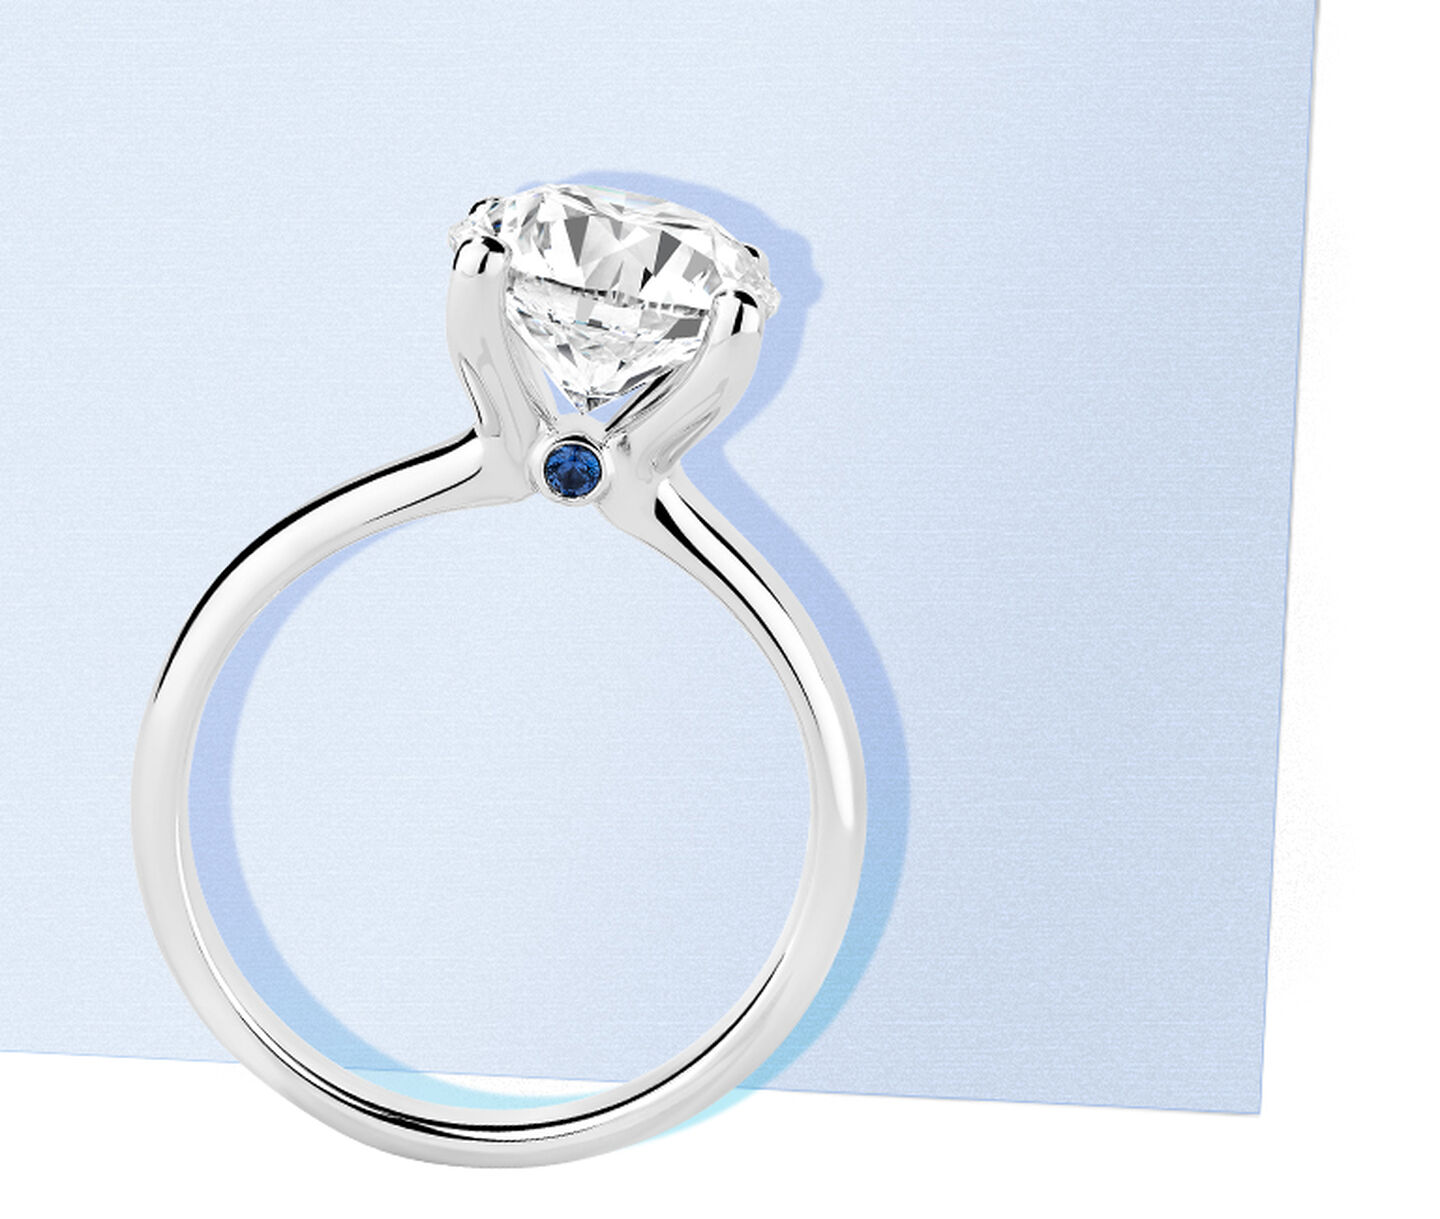 White gold diamond ring with sapphire accent stone